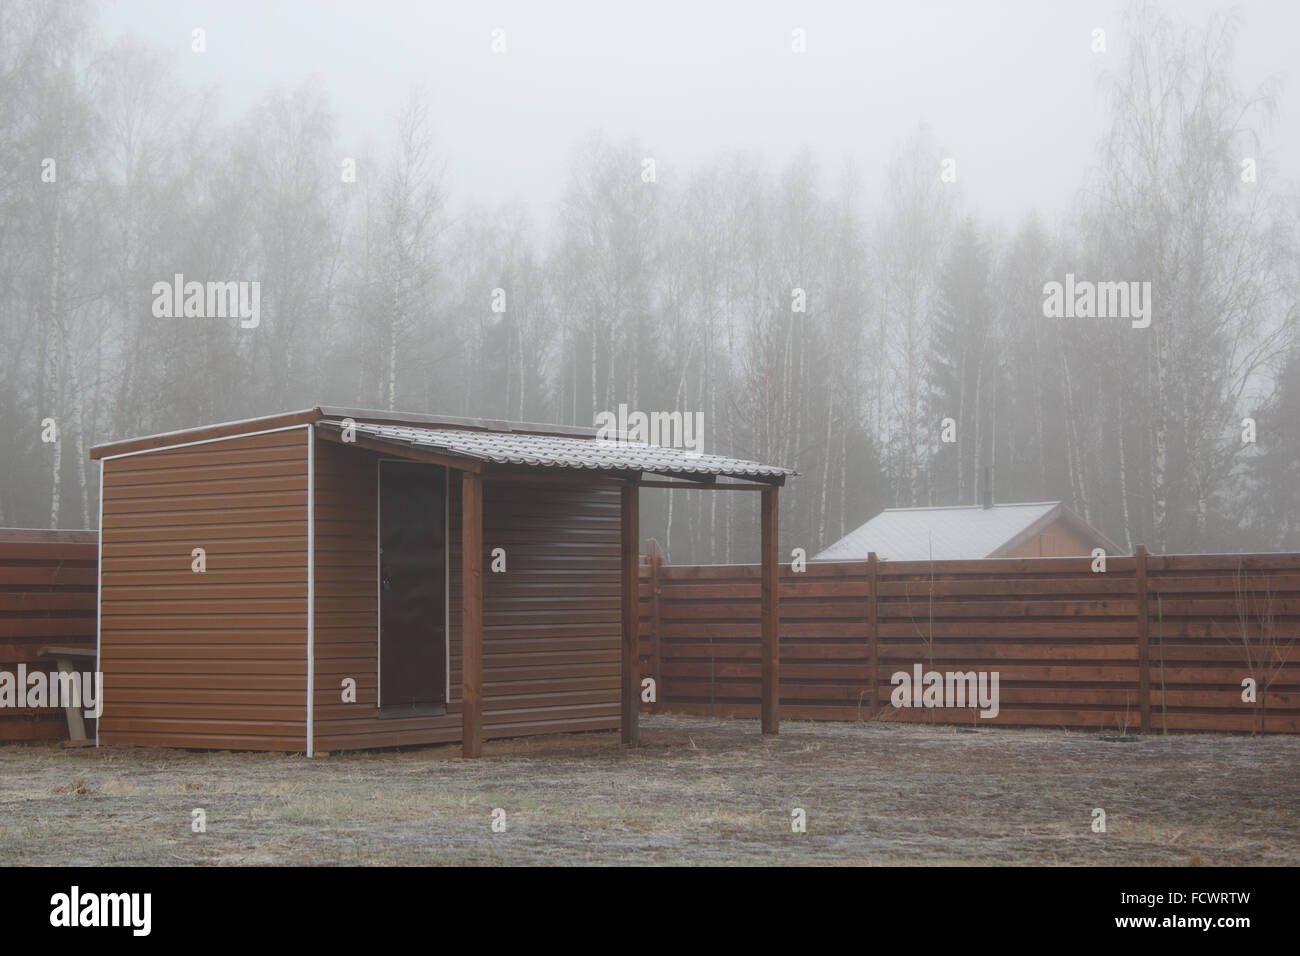 barn with a shed on frozen lawn in mist Stock Photo